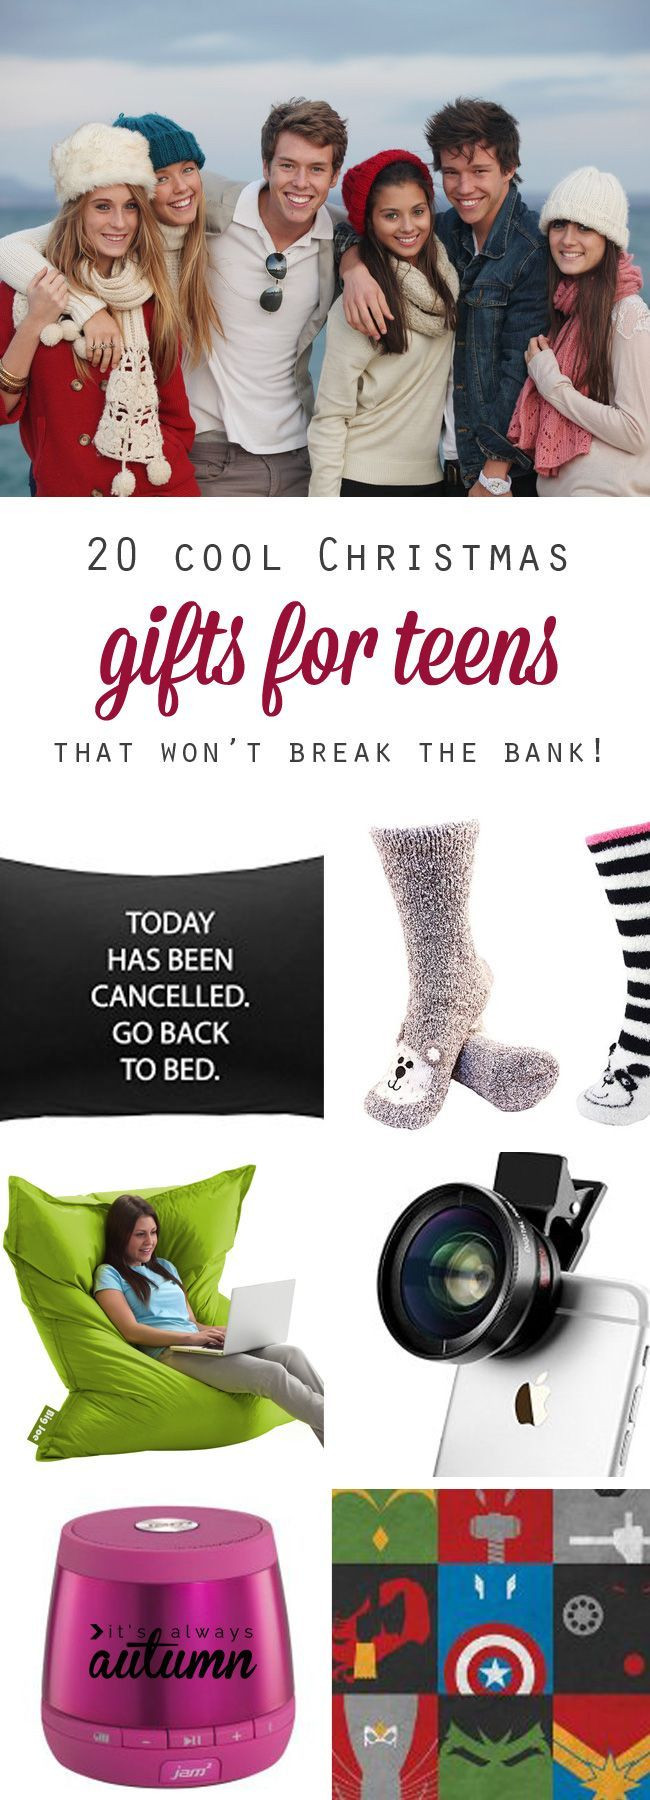 Cheap Gift Ideas For Boys
 17 Best images about Gift Ideas for boys on Pinterest